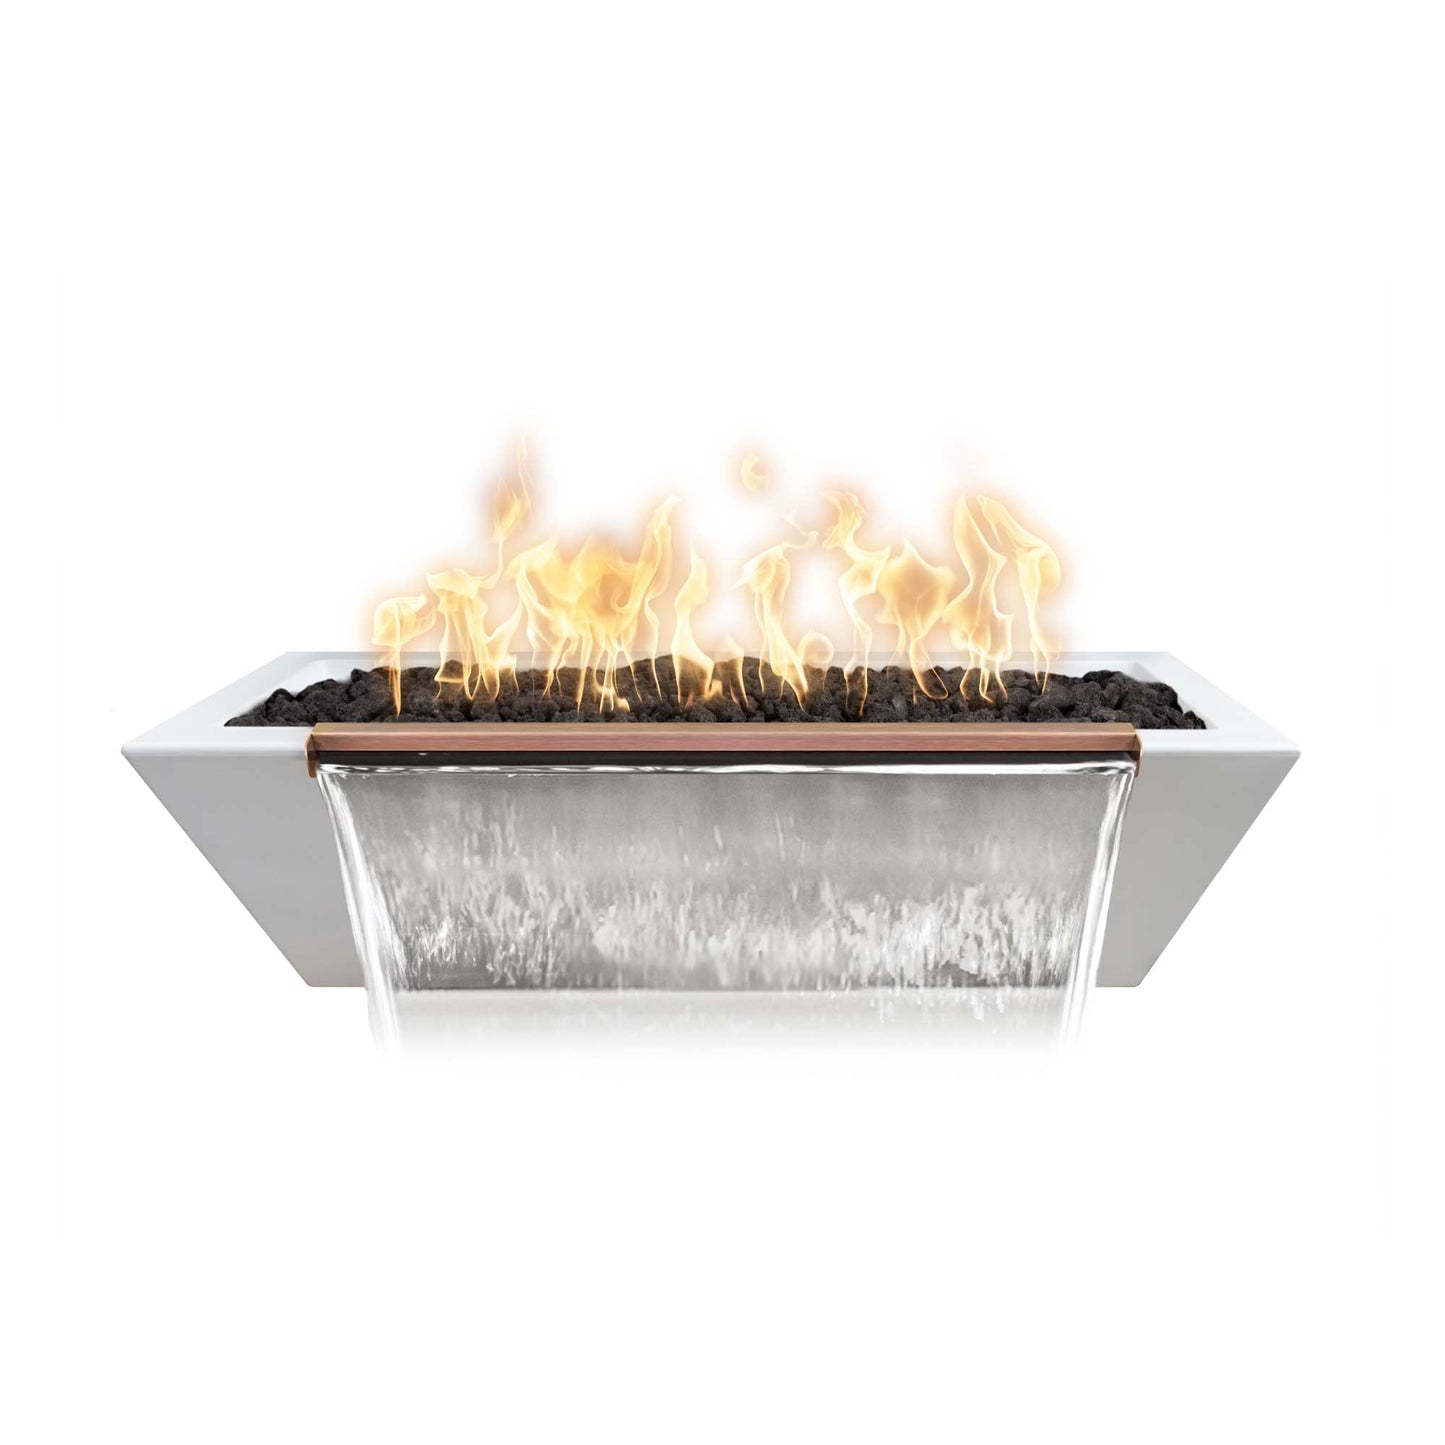 The Outdoor Plus Linear Maya 60" Metallic Silver GFRC Concrete Liquid Propane Fire & Water Bowl with 12V Electronic Ignition